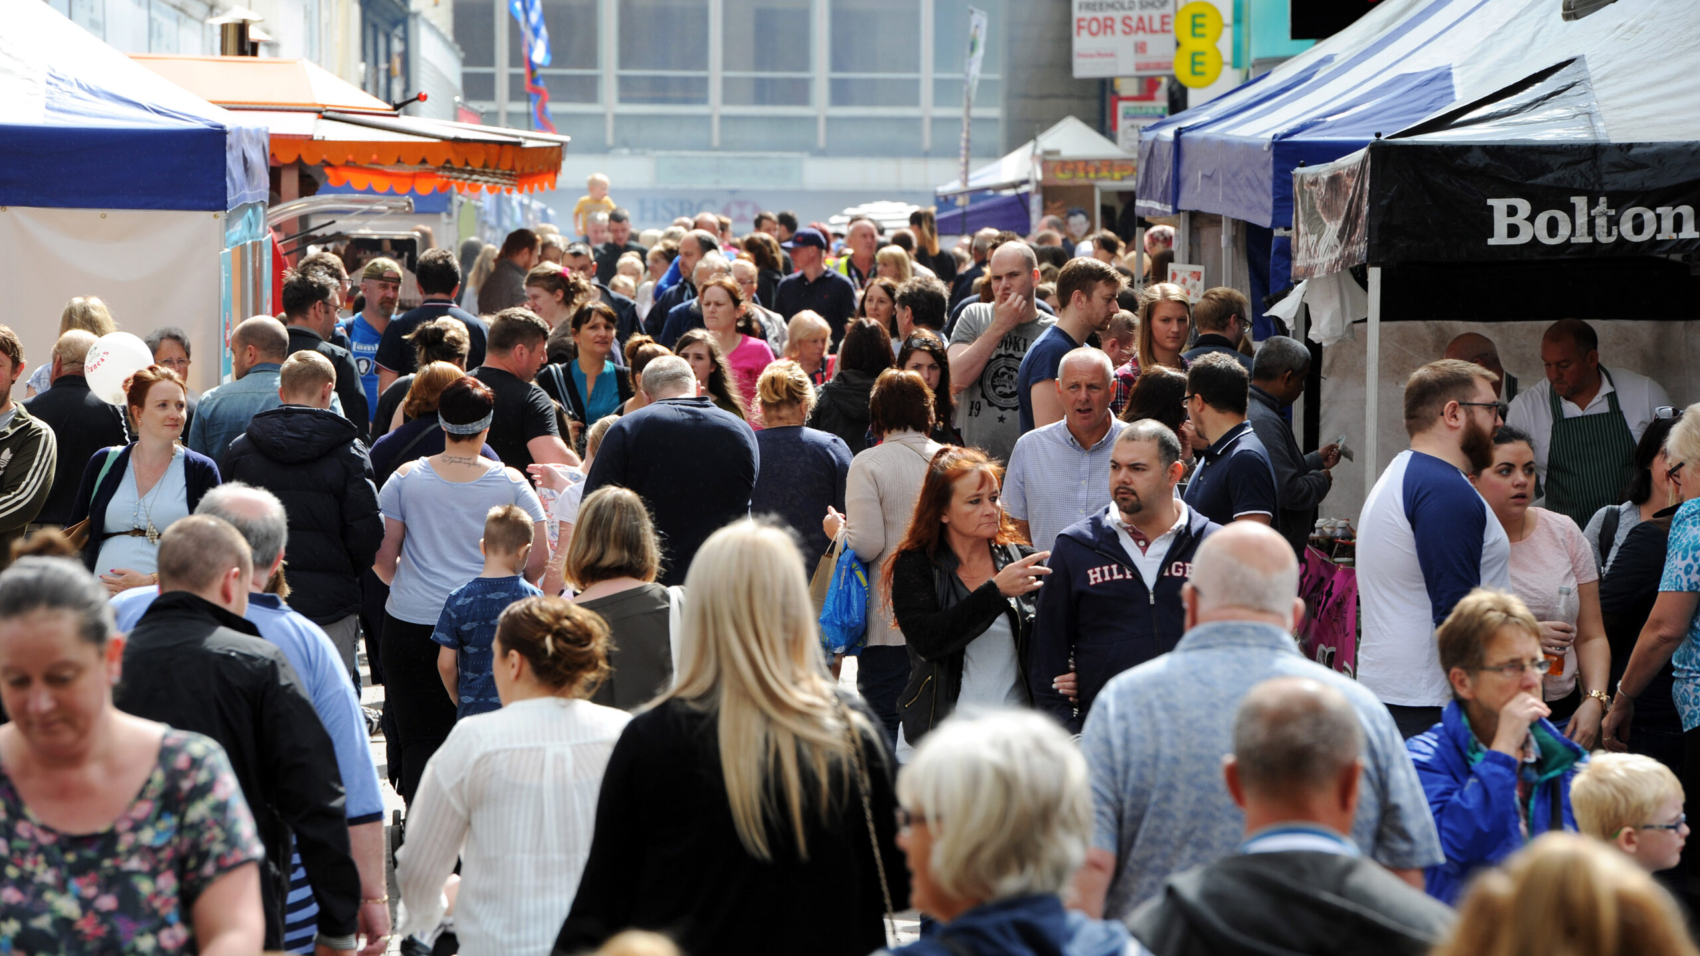 The annual Bolton Food and Drink Festival once again attracted large crowds on its third day. Picture by Paul Heyes, Sunday August 28, 2016.